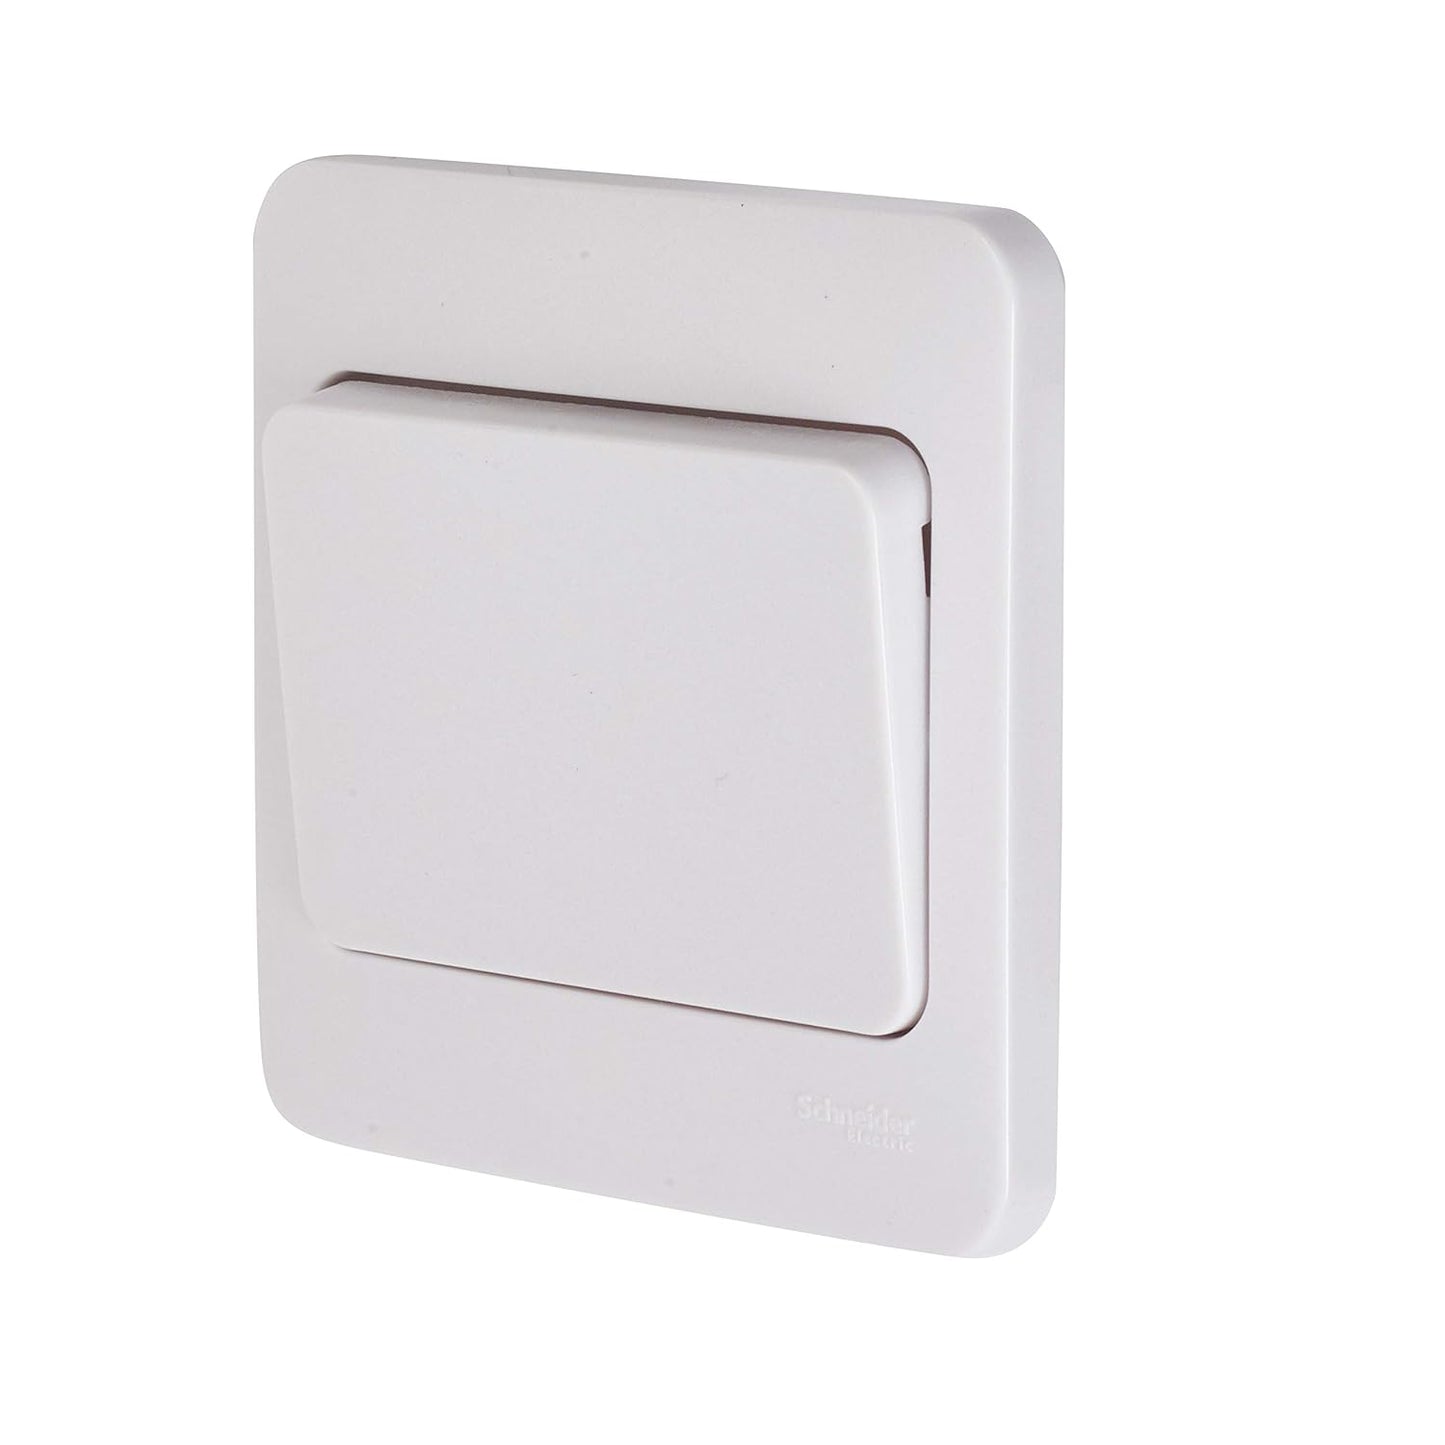 Light Switch Wide Rocker Swith Schneider Electric Lisse White Moulded GGBL1012W